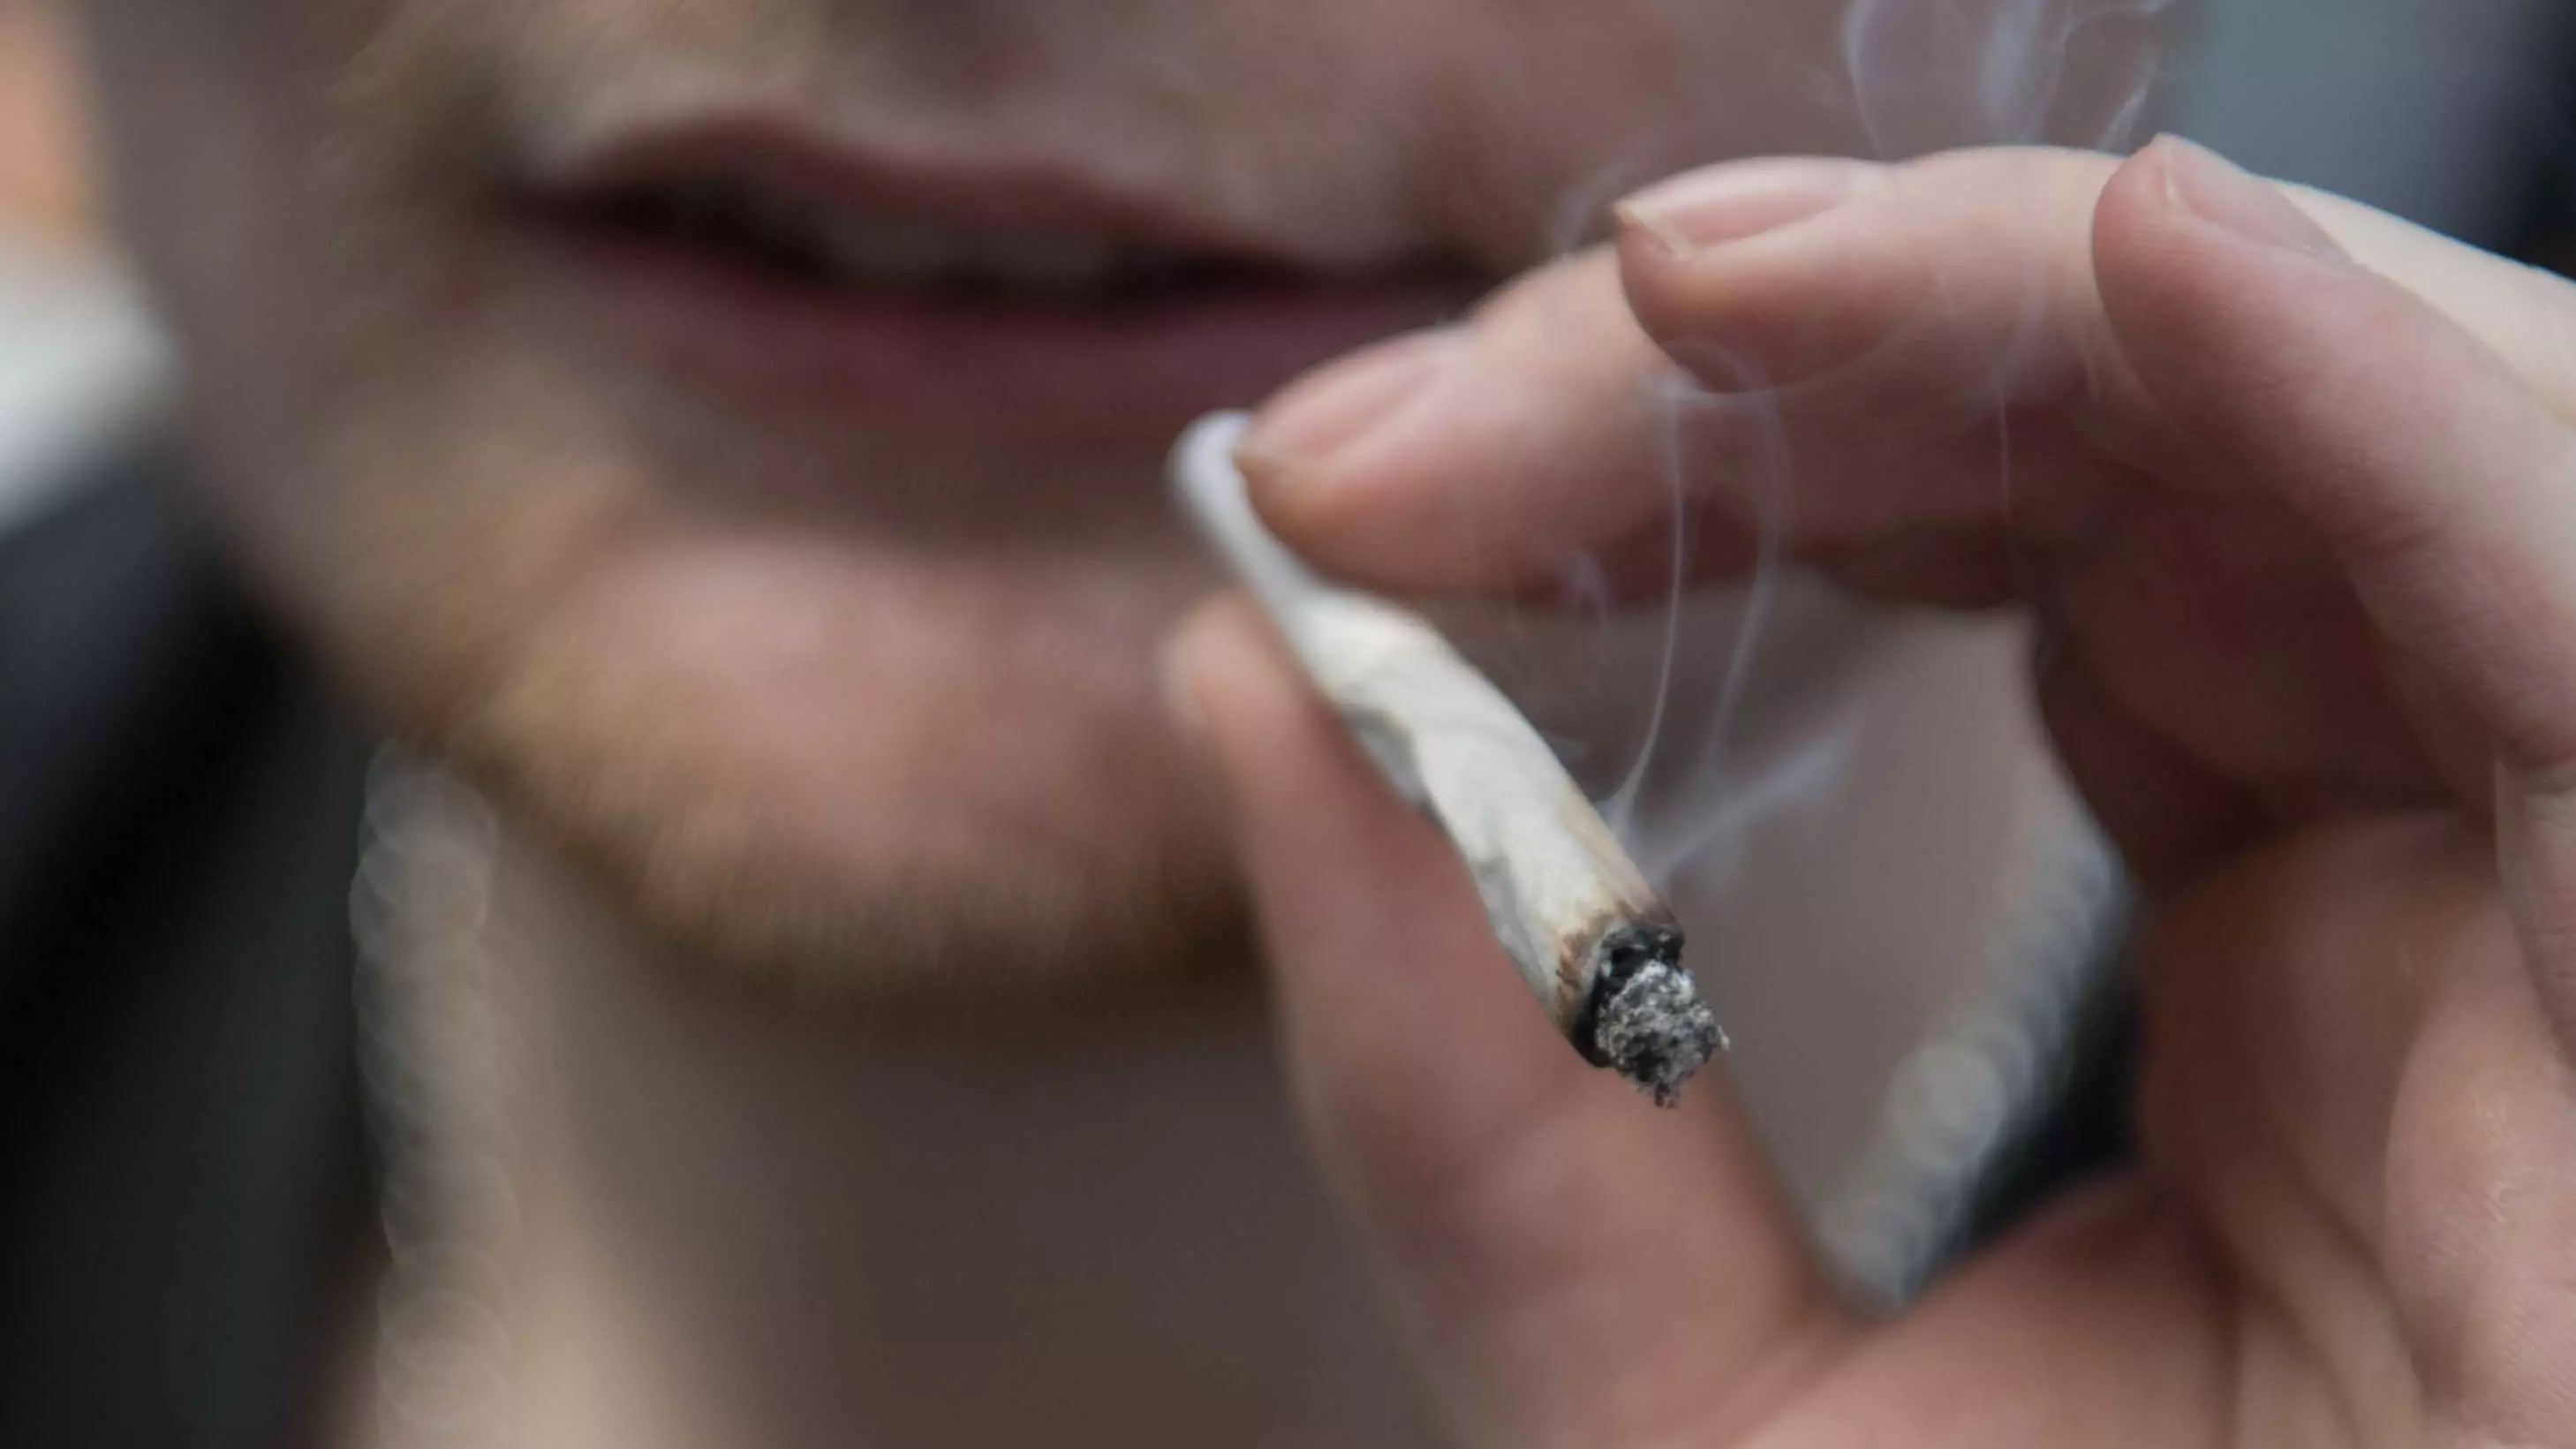 Amsterdam To Consider Banning British Tourists From Buying Weed